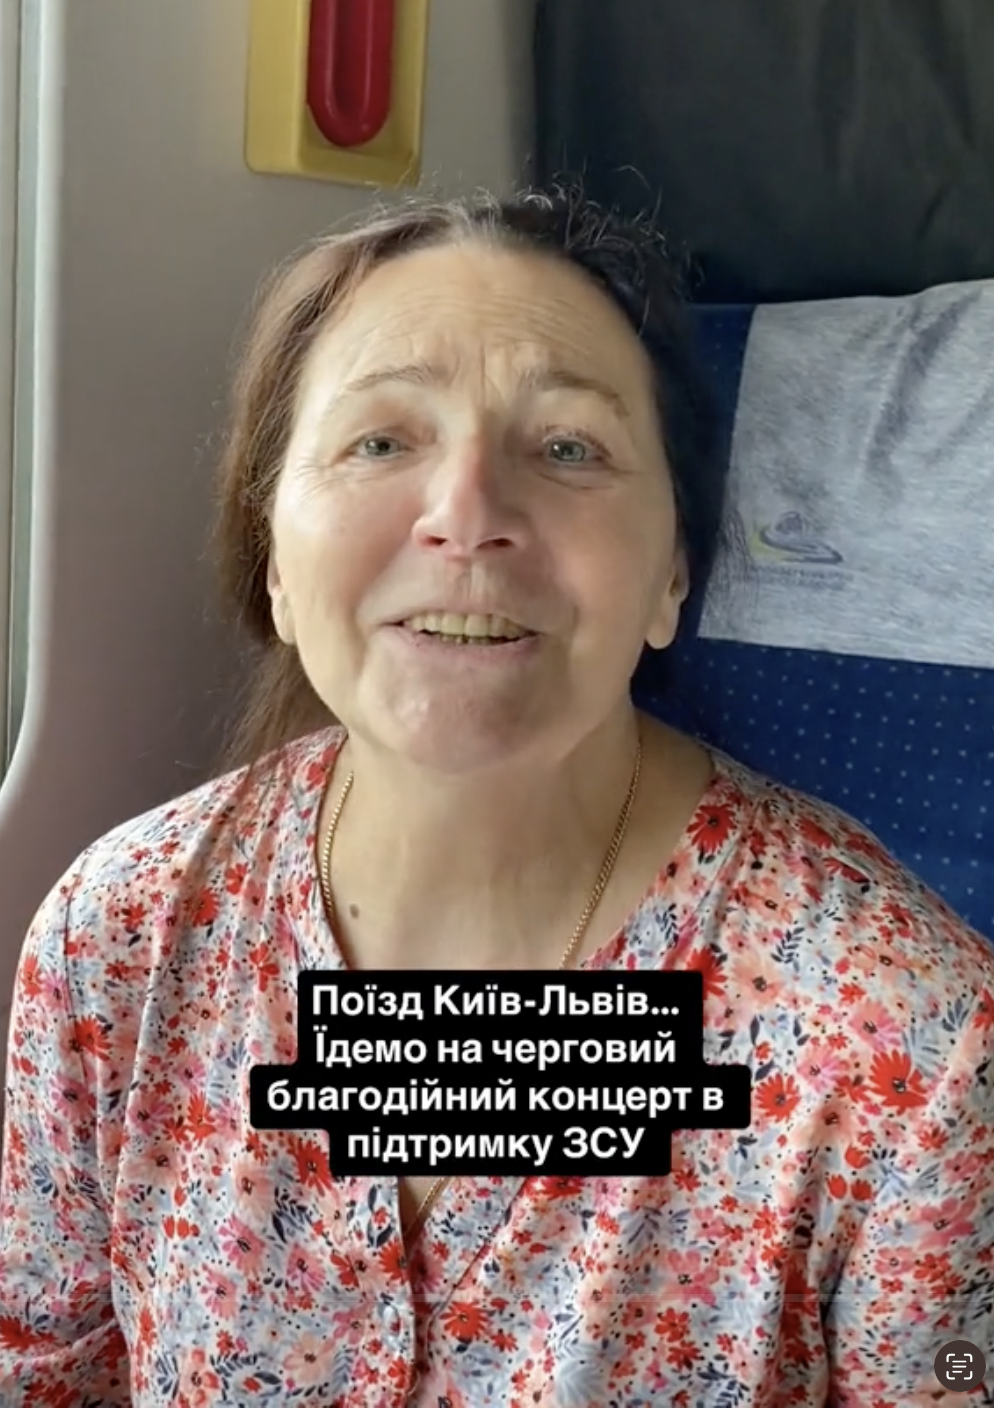 Video of Nina Matvienko two months before she died: the woman was cheerful and happy